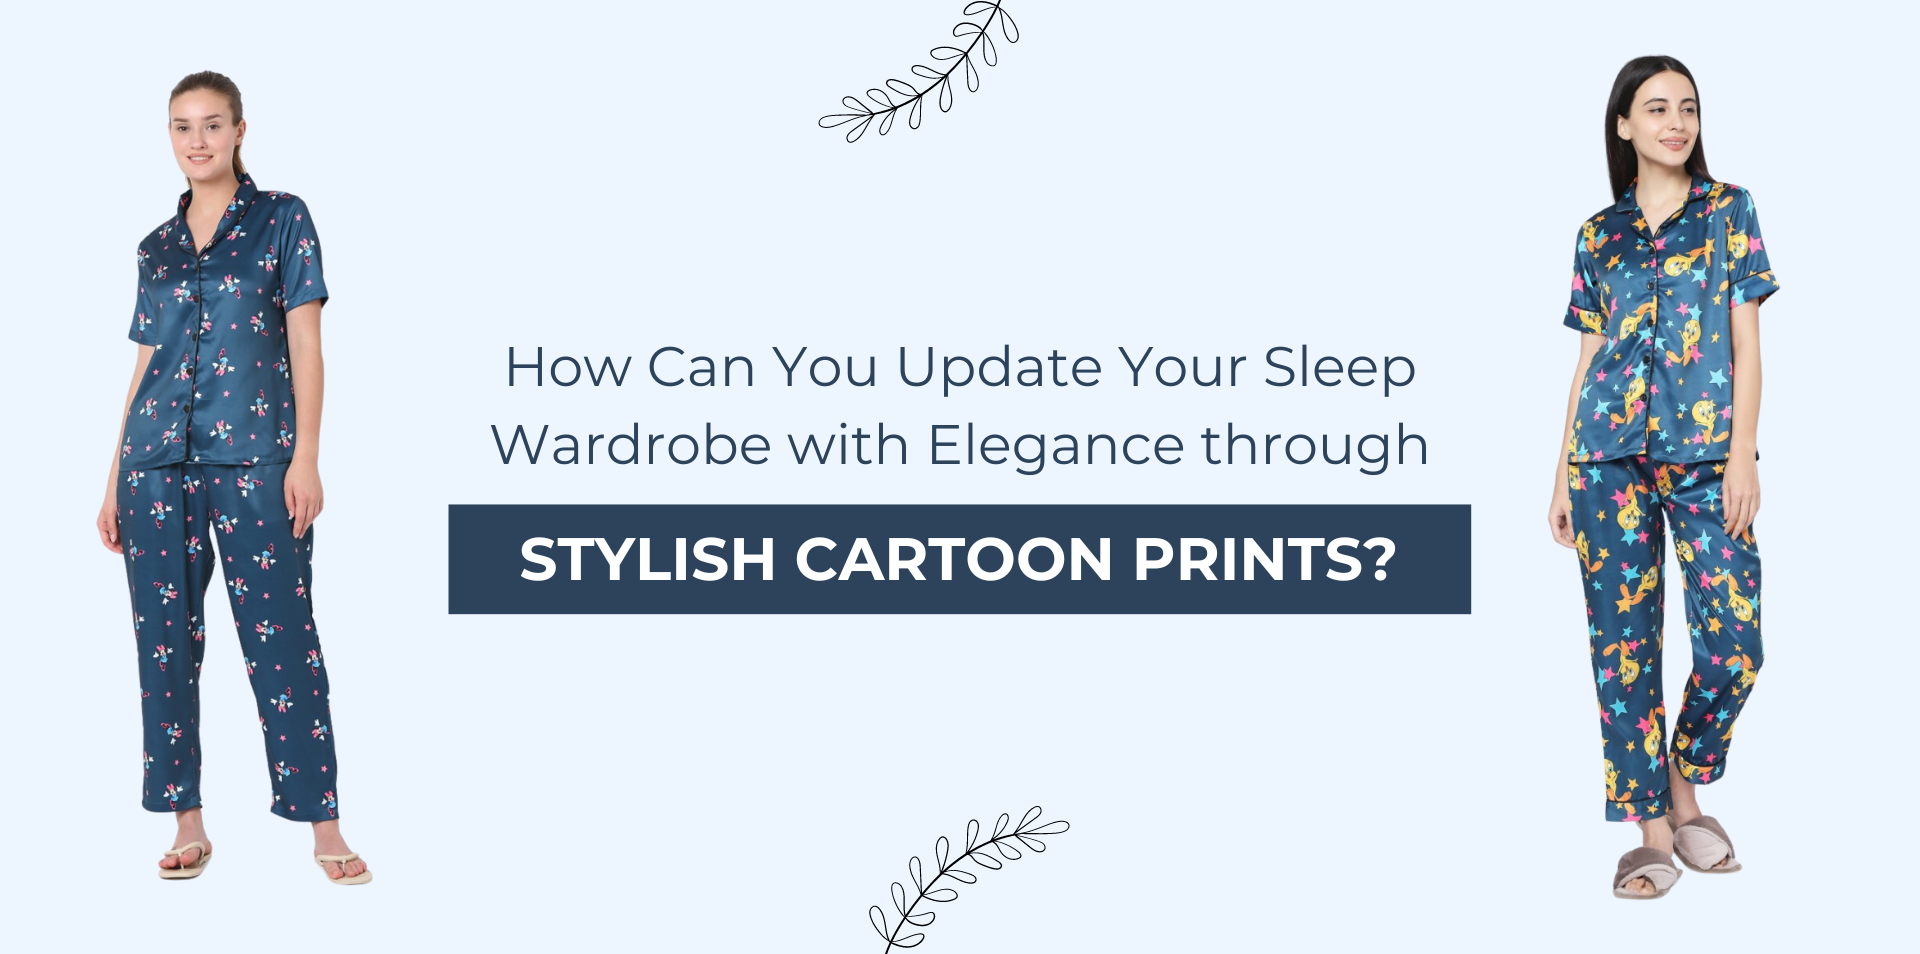 How Can You Update Your Sleep Wardrobe with Elegance through Stylish Cartoon Prints?